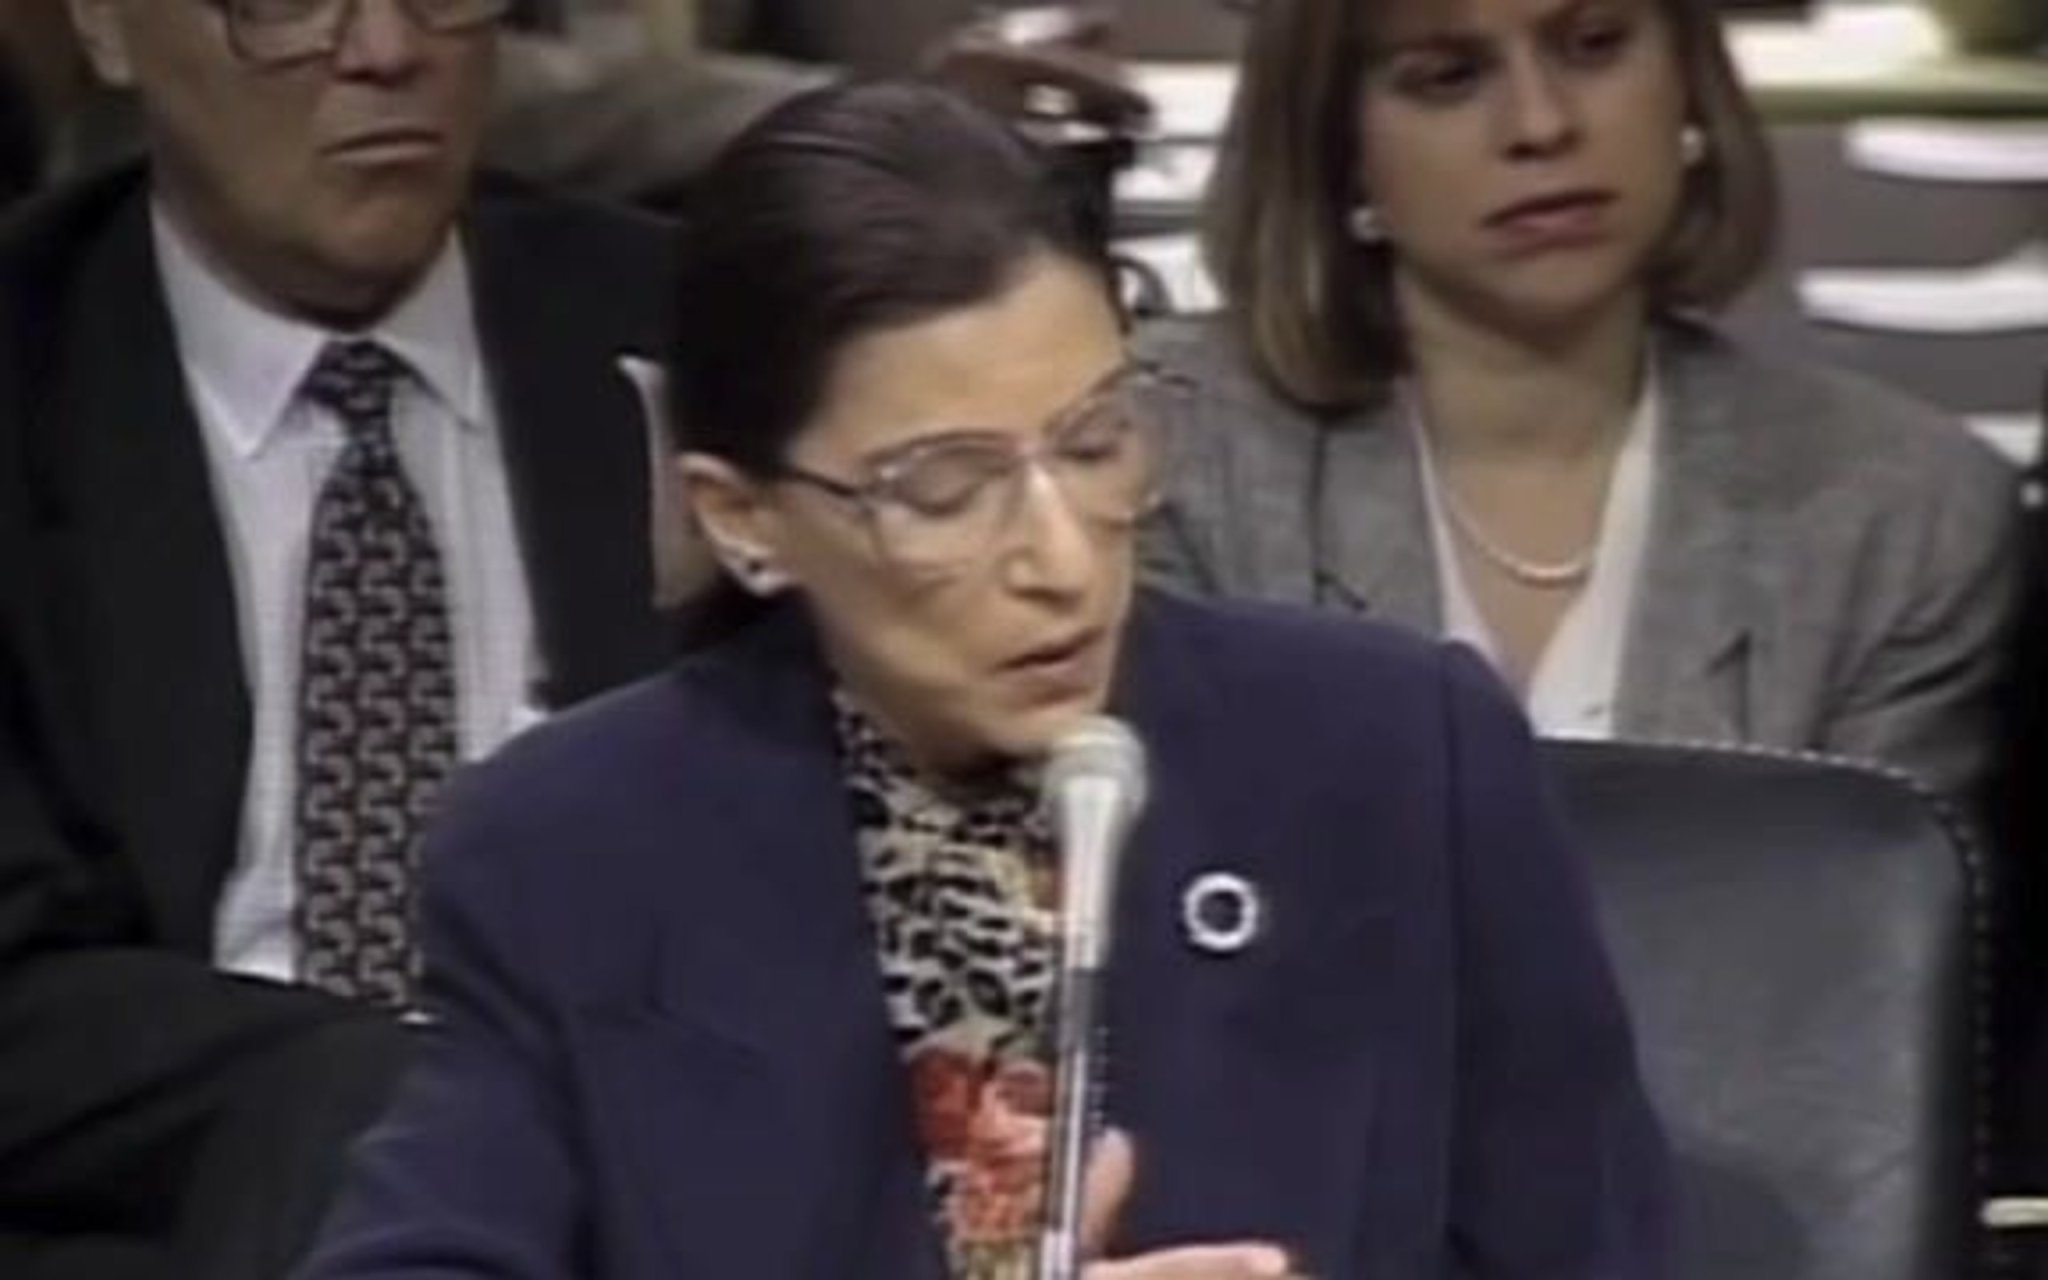 Flashback to 1993: Ruth Bader Ginsburg champions abortion rights during her Supreme Court confirmation hearing.